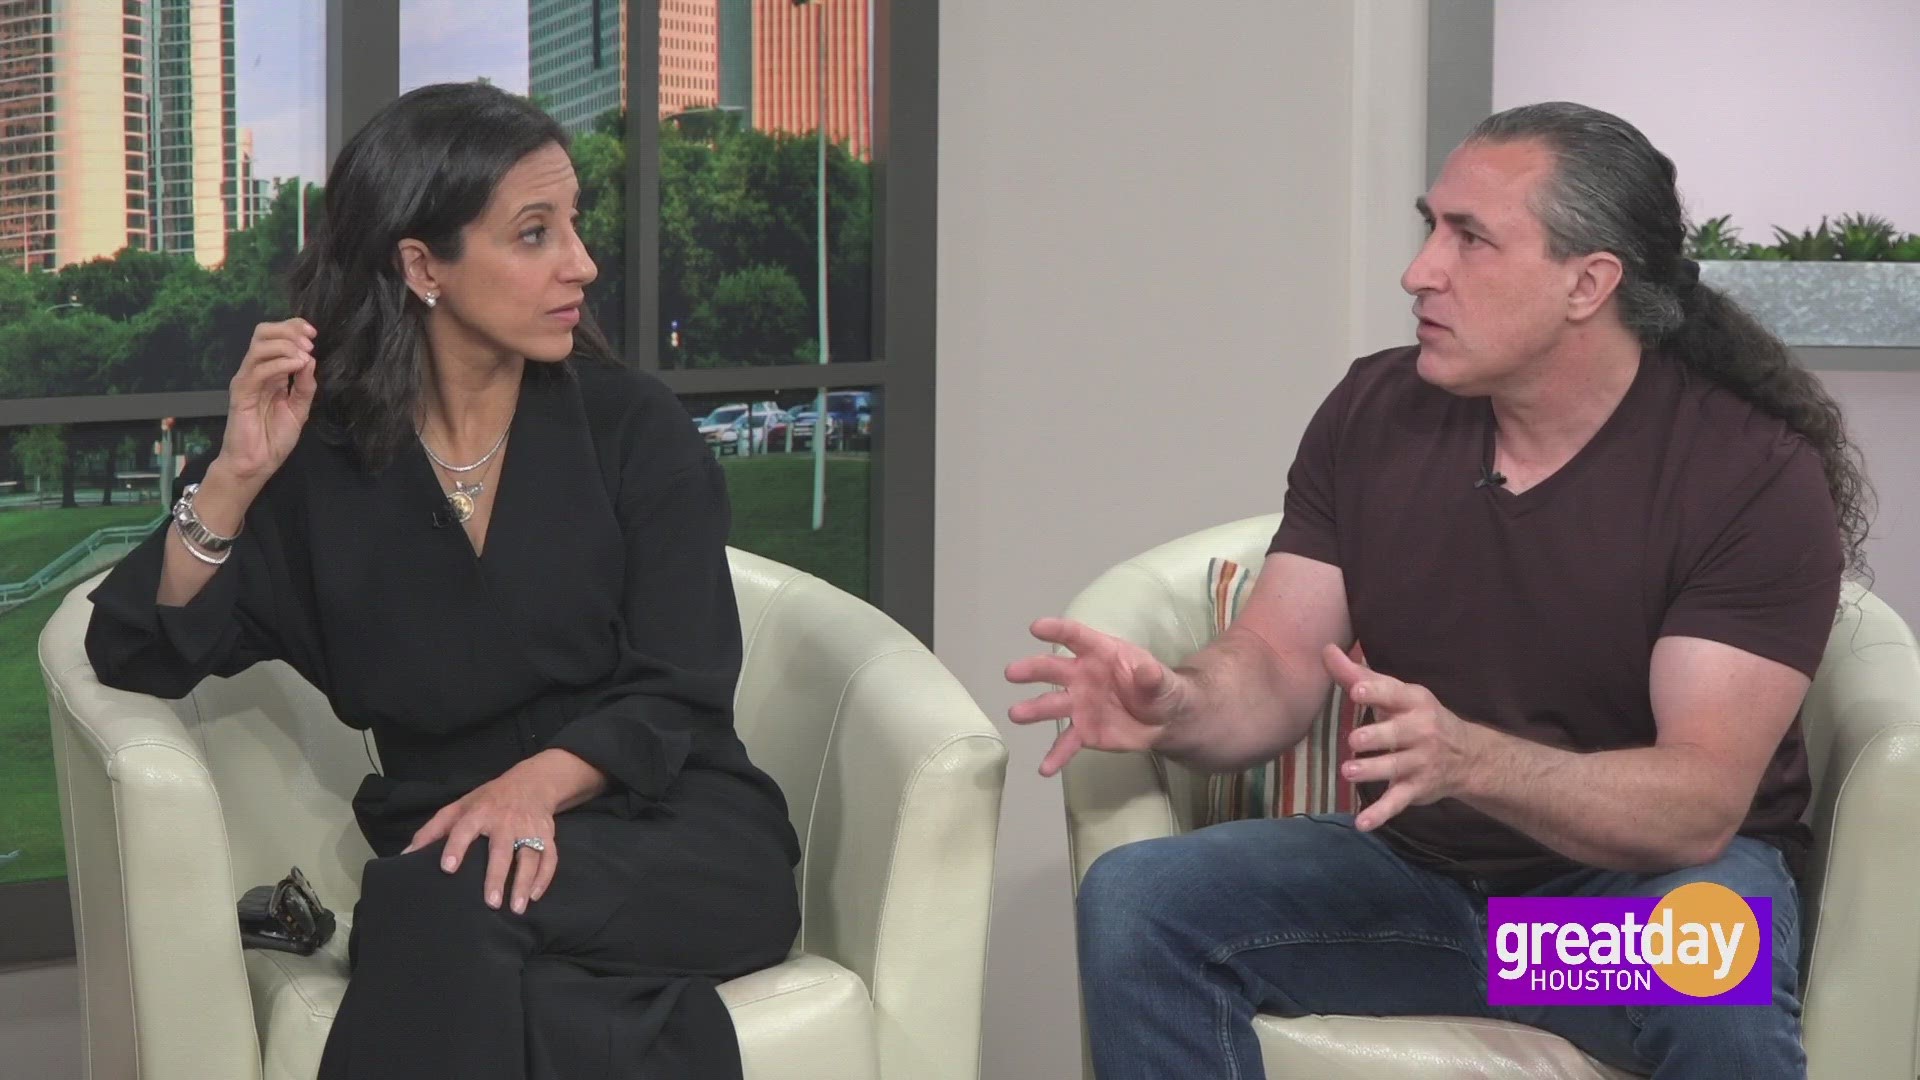 Rania Mankarious with Crime Stoppers Houston and St. Thomas University Professor Dr. Cesare Wright talk about the pros and cons of artificial intelligence.